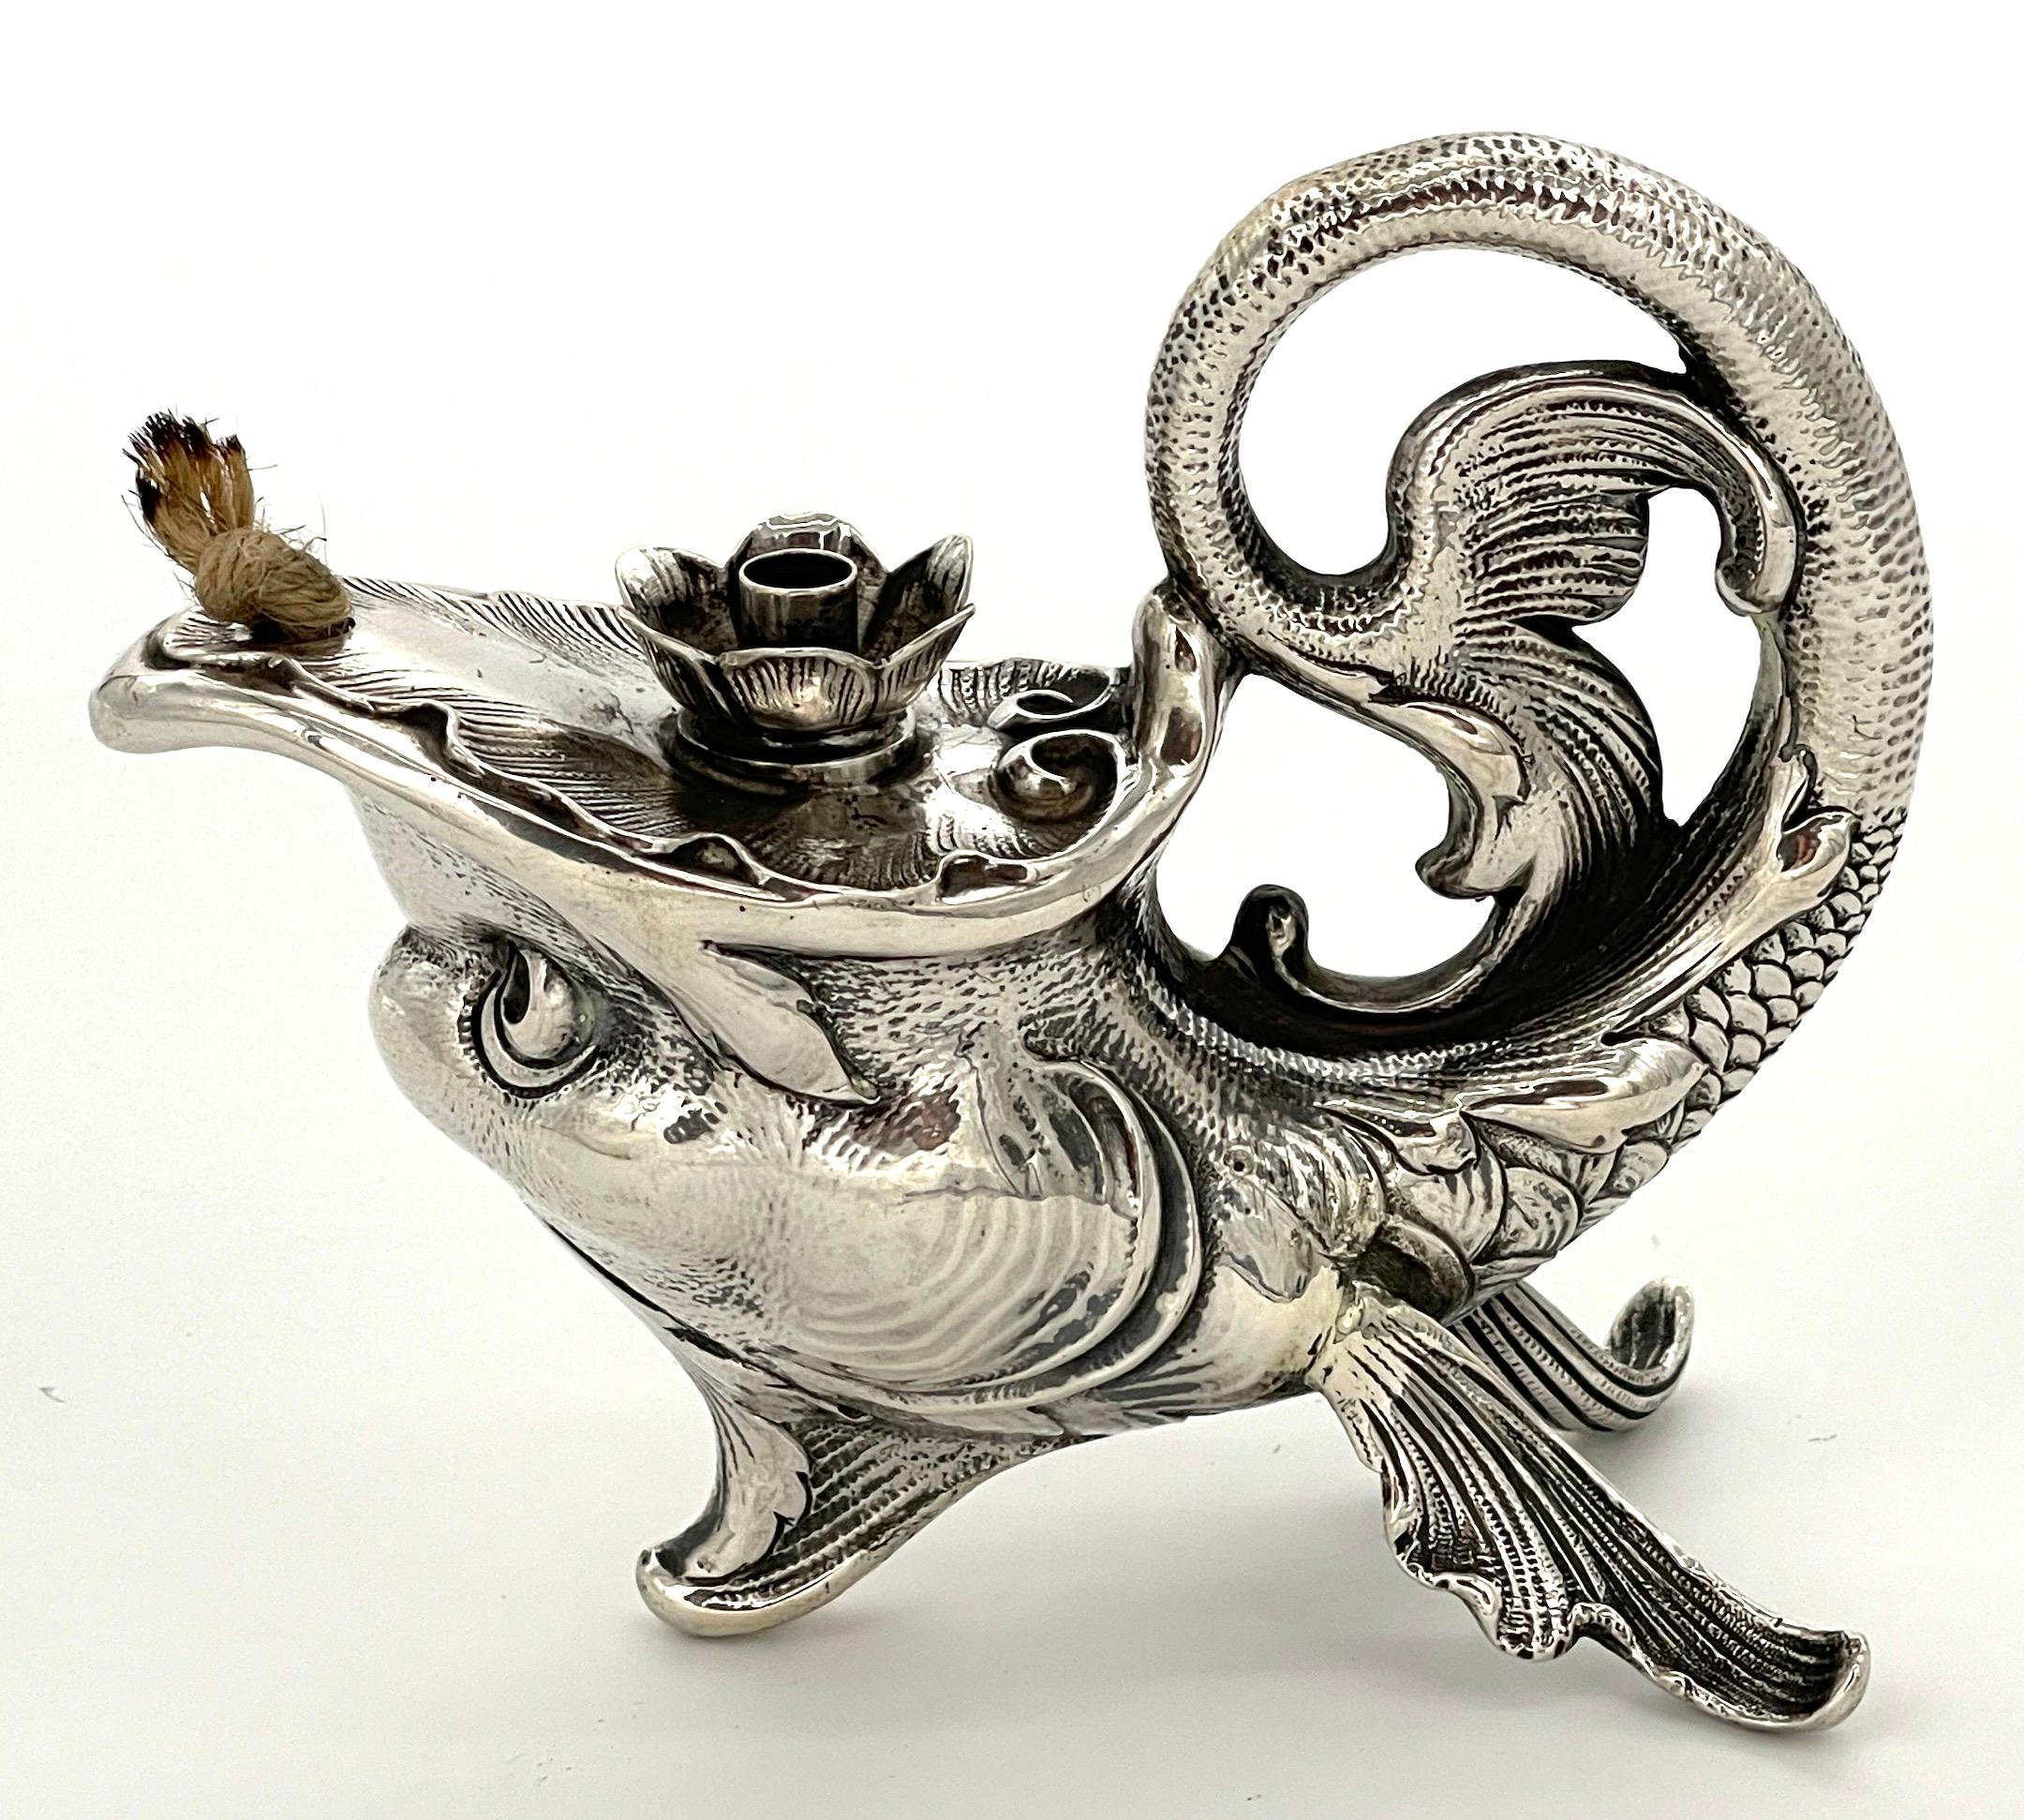 Art Nouveau German Sterling Fantasy Fish Motif Oil Lamp/Cigar Lighter
German, Late 19th Century, Unmarked, .800 Silver

Immerse yourself in the enchanting world of Art Nouveau with this captivating German sterling fantasy fish motif oil lamp/cigar